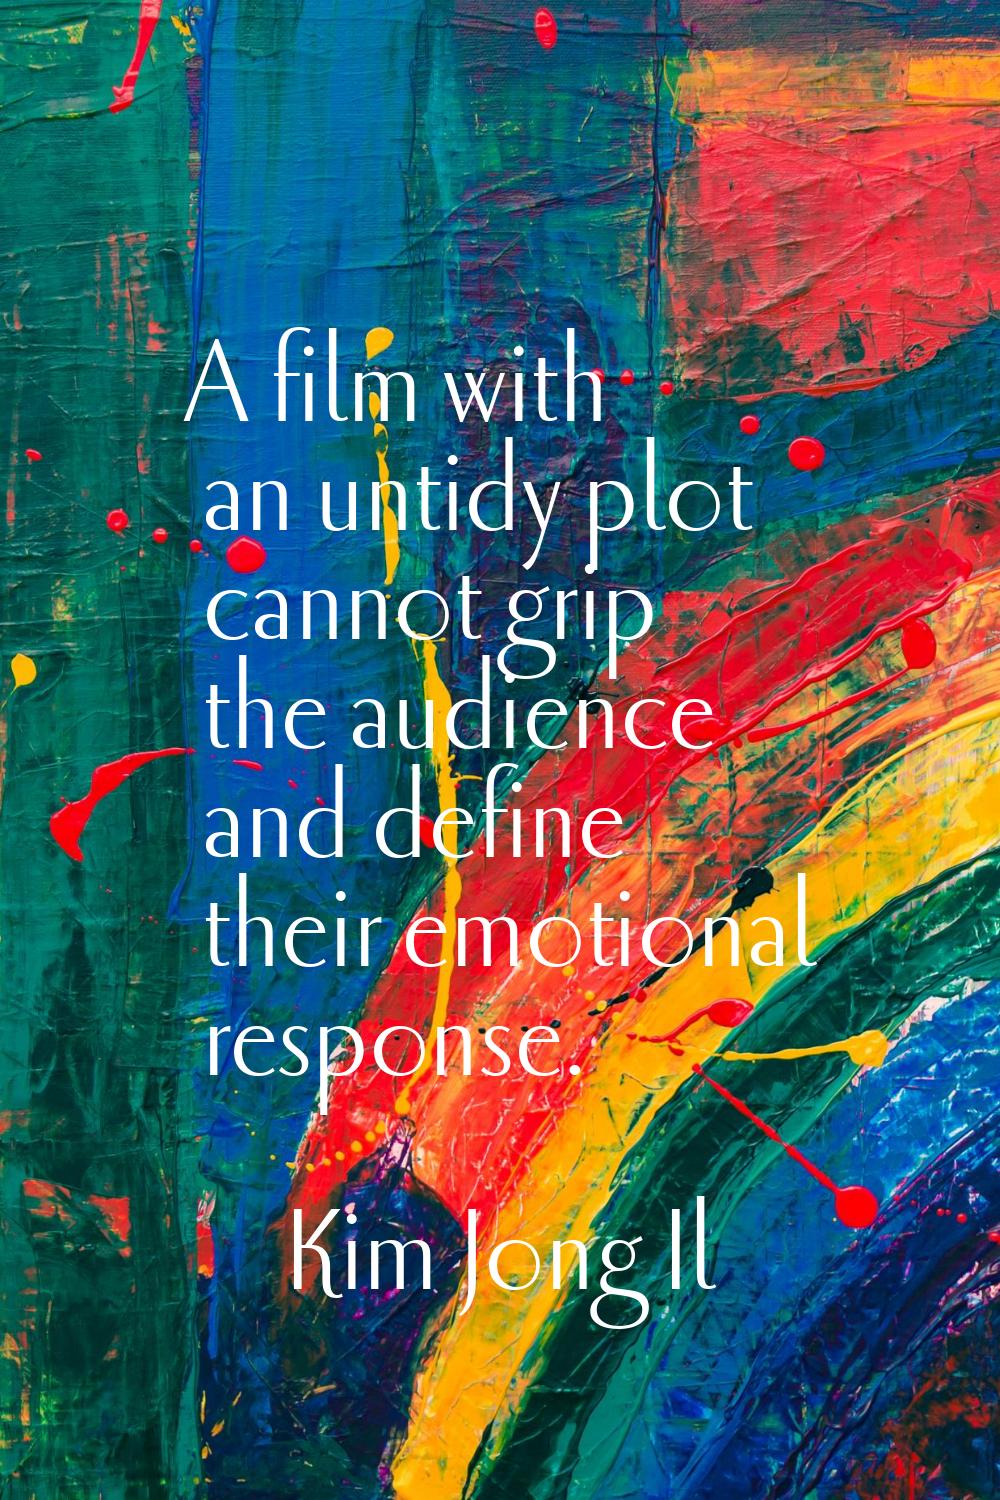 A film with an untidy plot cannot grip the audience and define their emotional response.